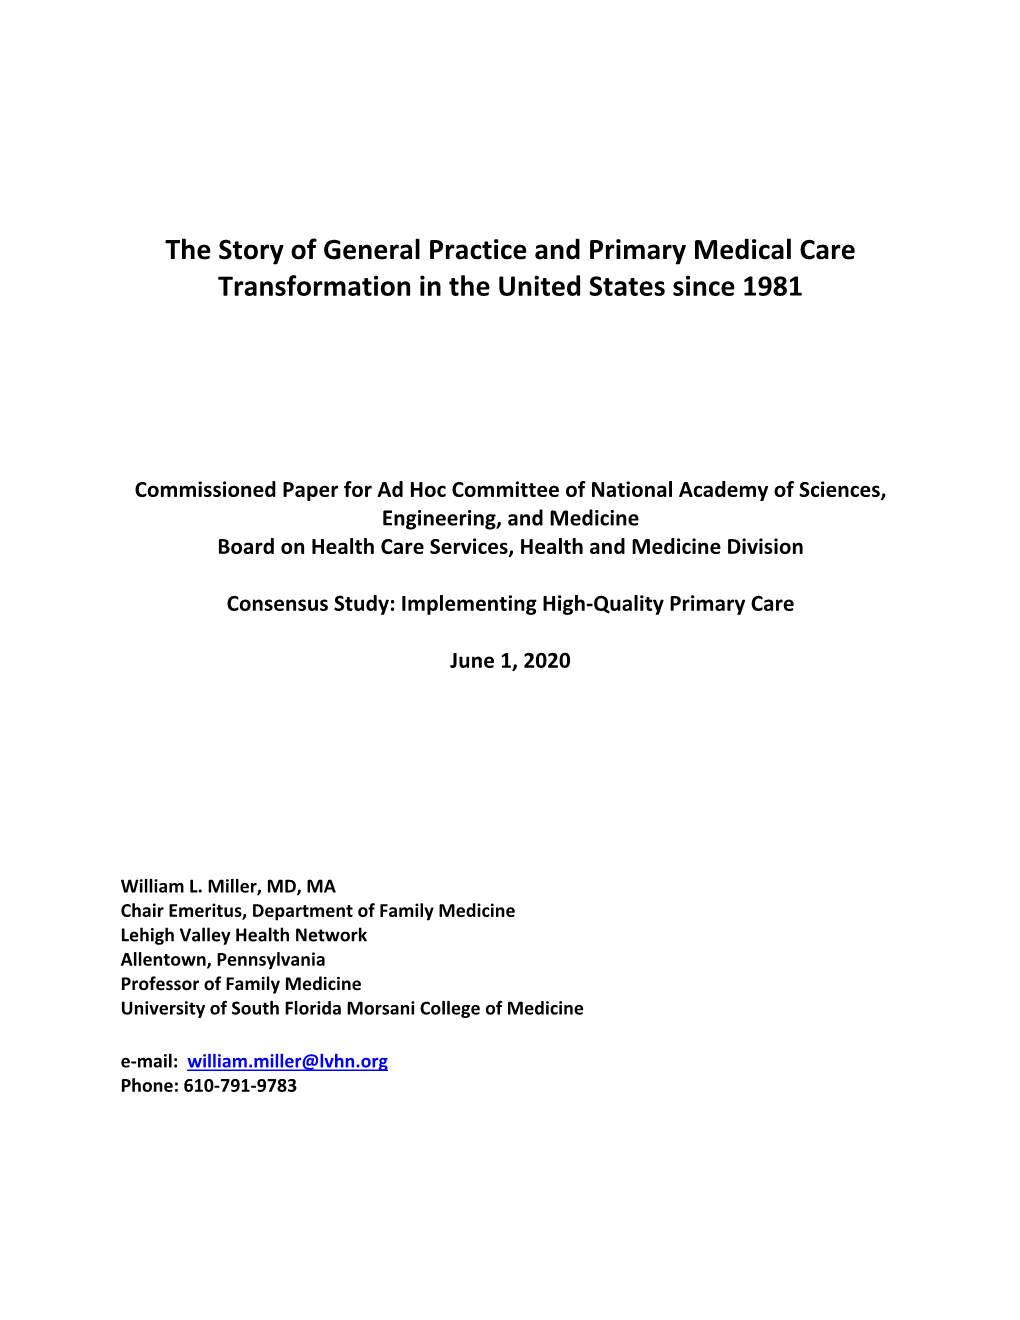 The Story of General Practice and Primary Medical Transformation In